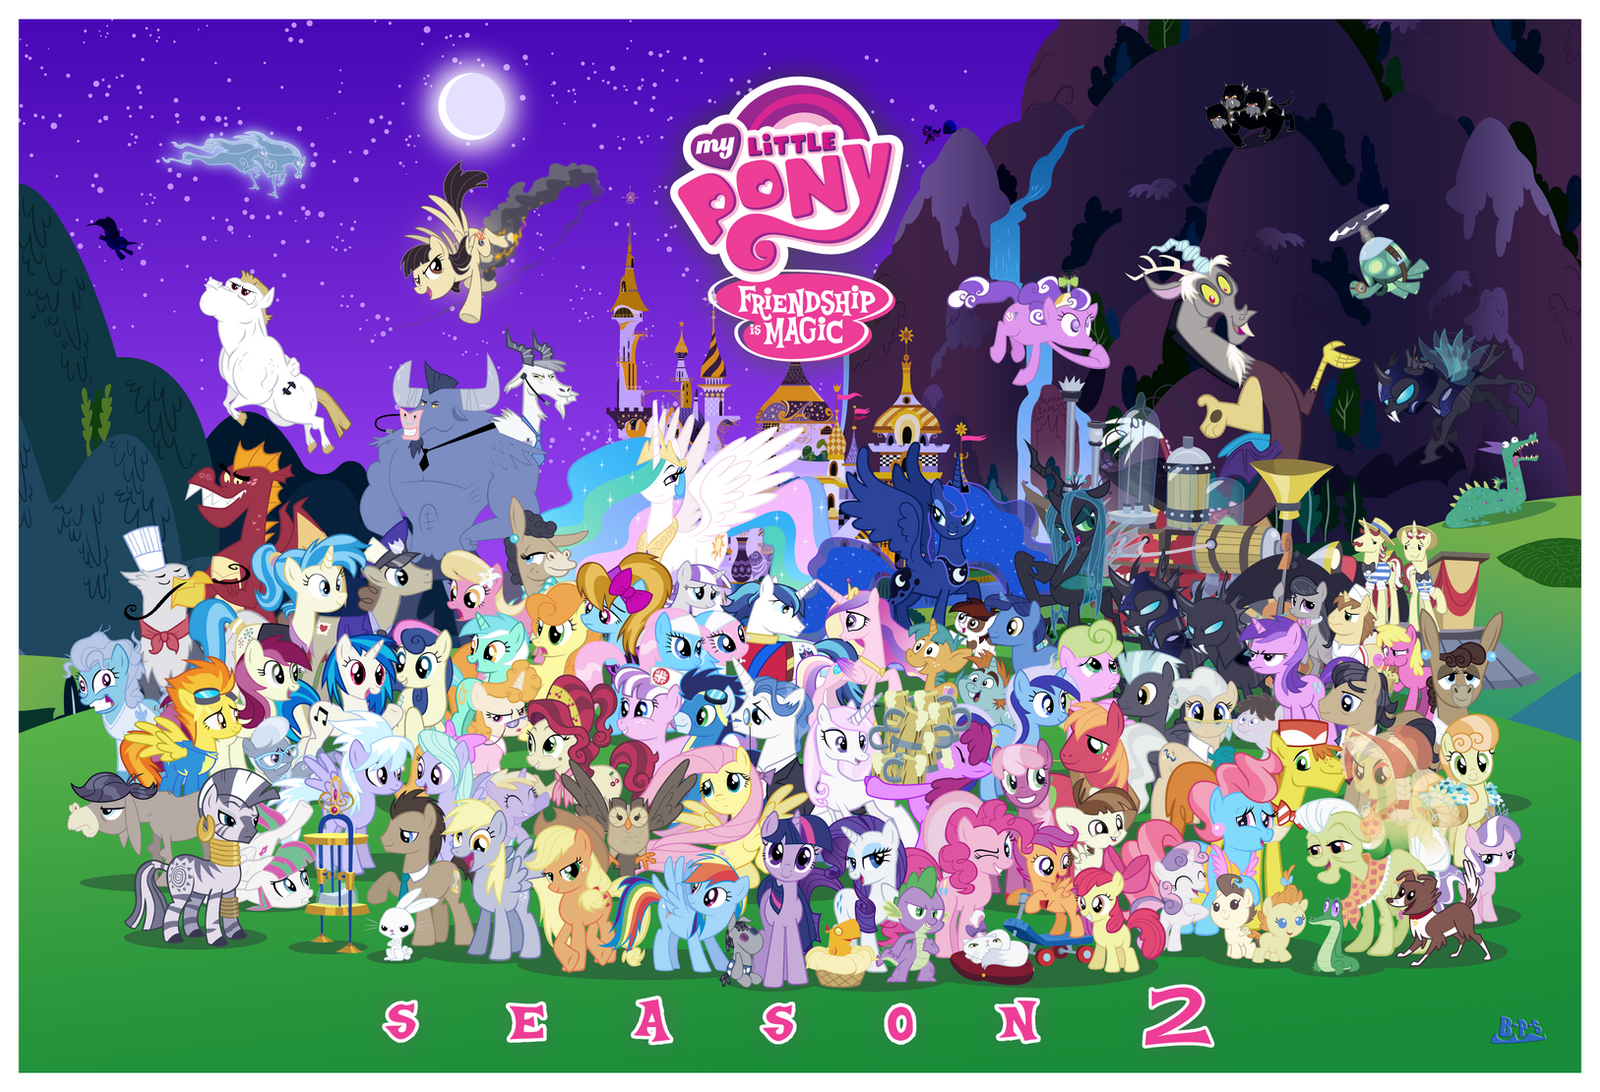 Who is your favorite pony?